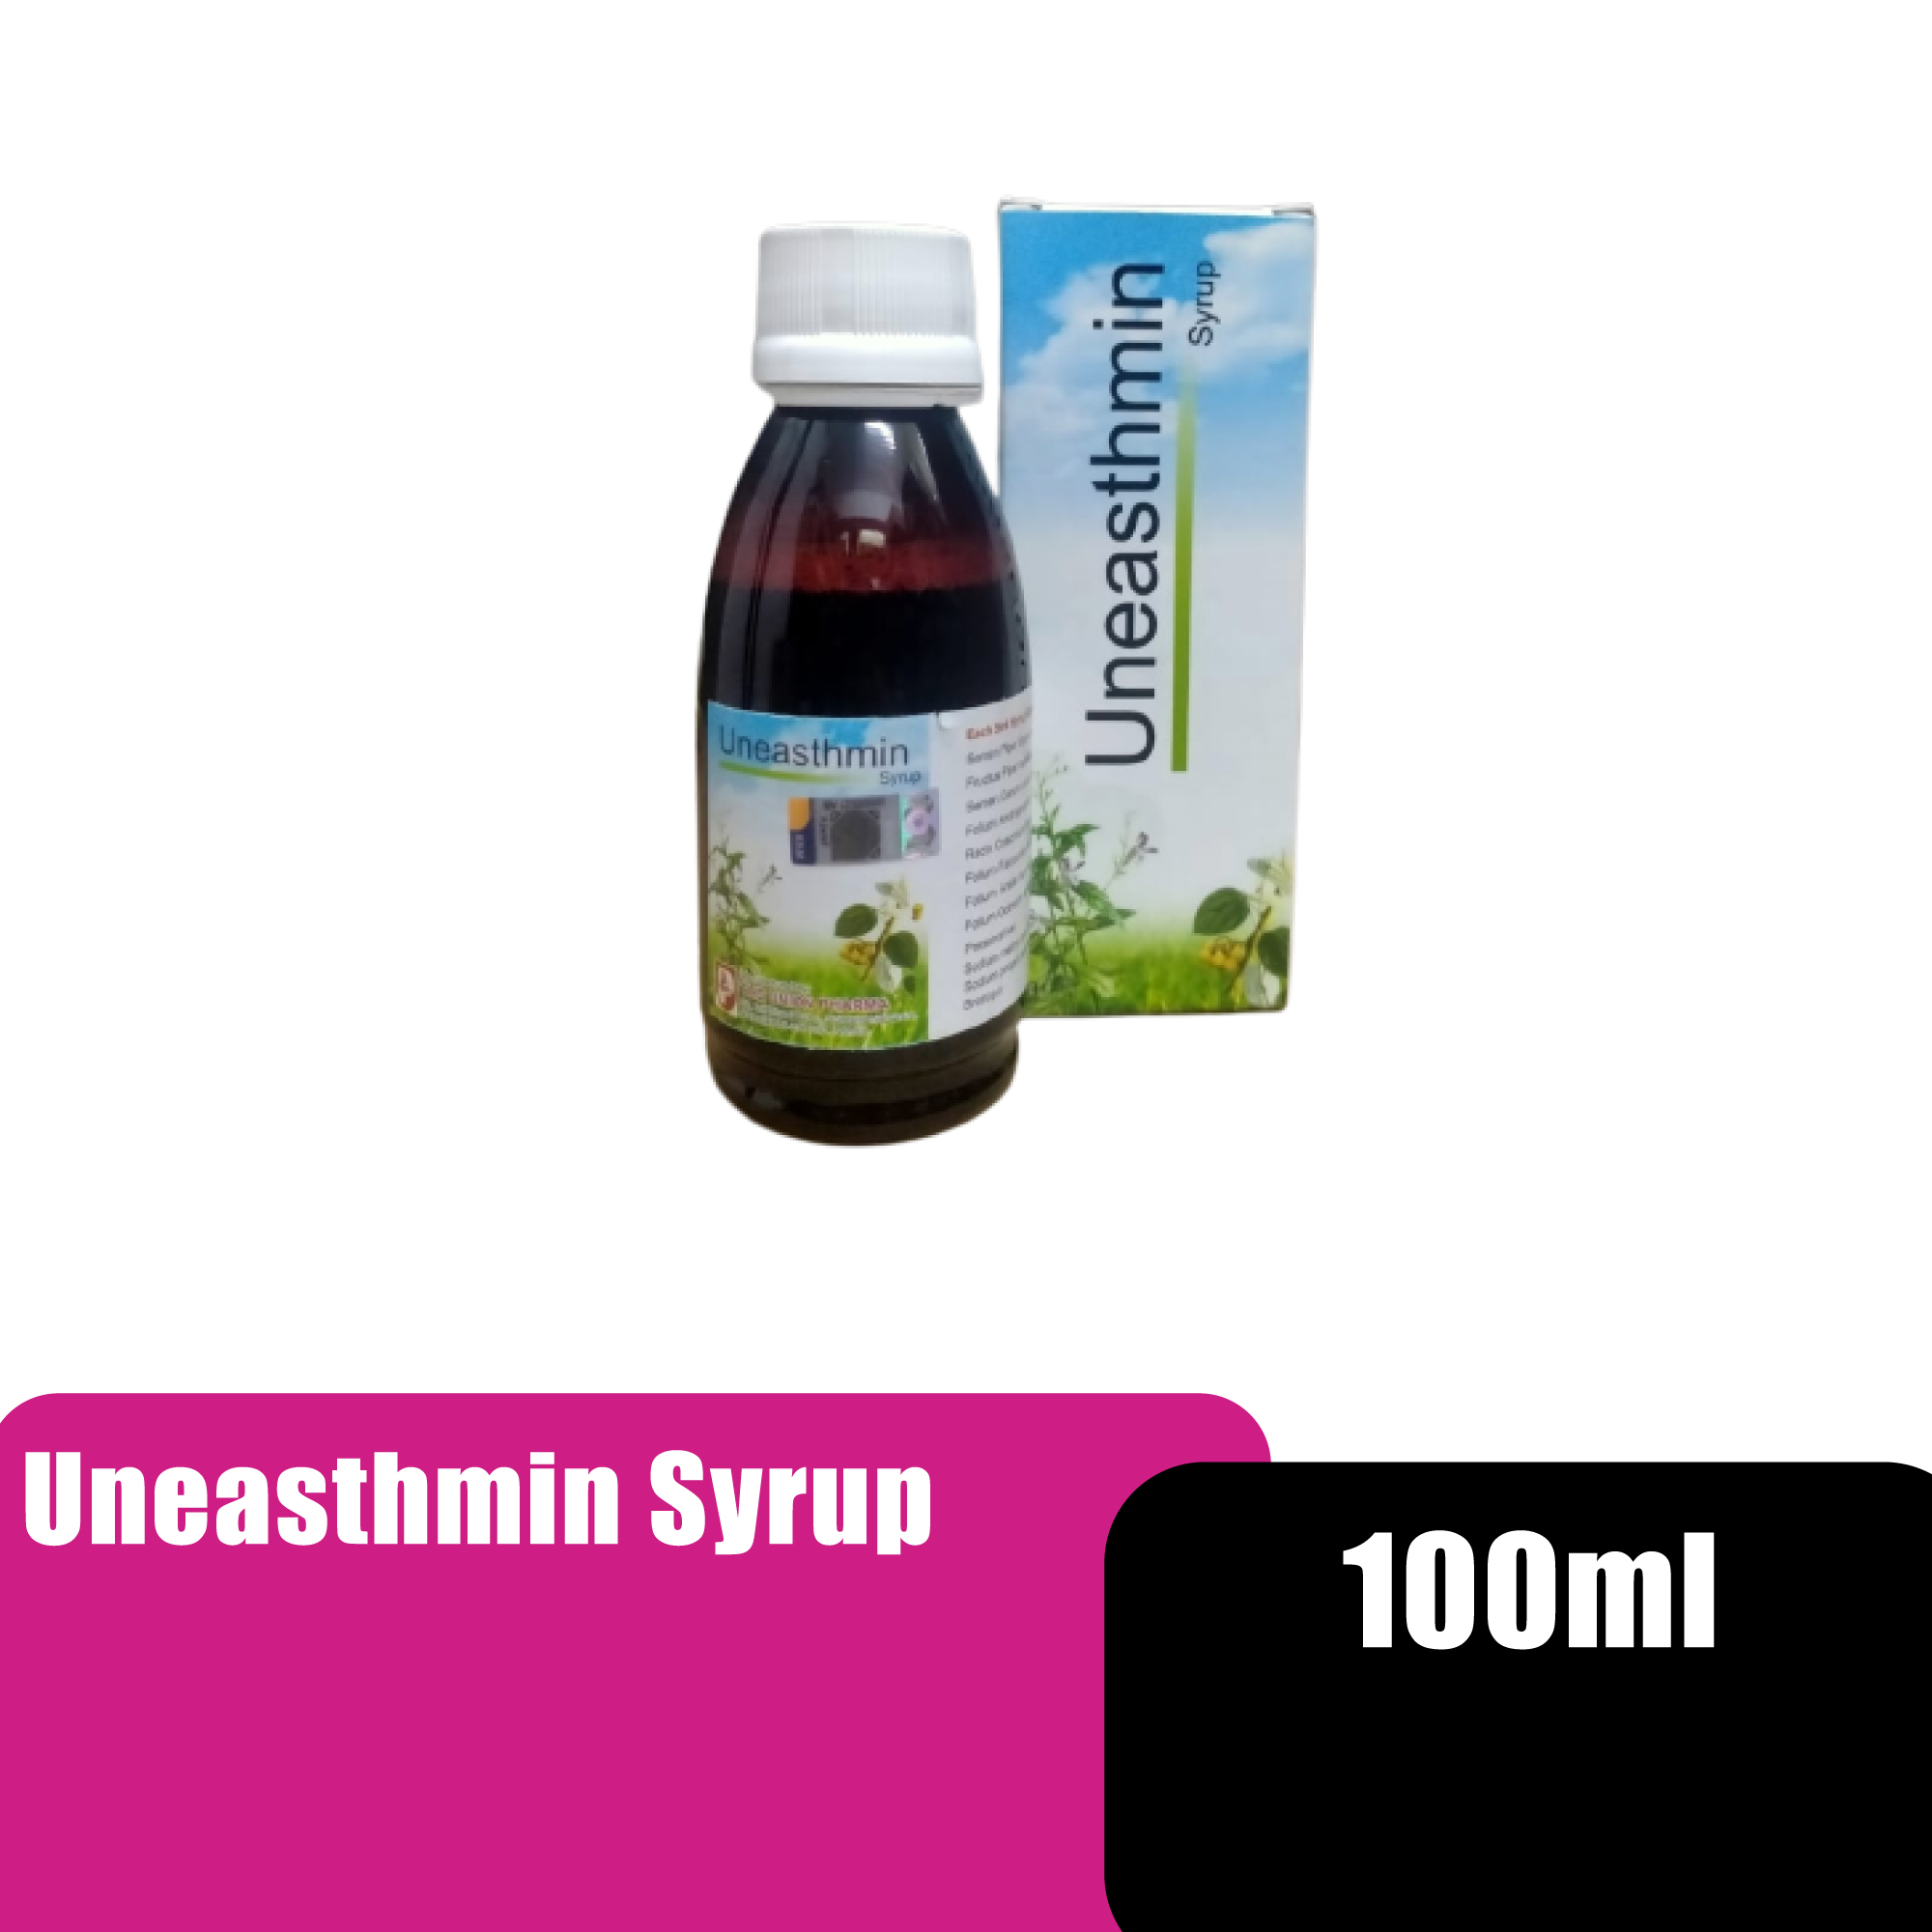 Uneasthmin Syrup Ubat batuk 100ml (For nasal congestion/cough &cold / phlegm relief)